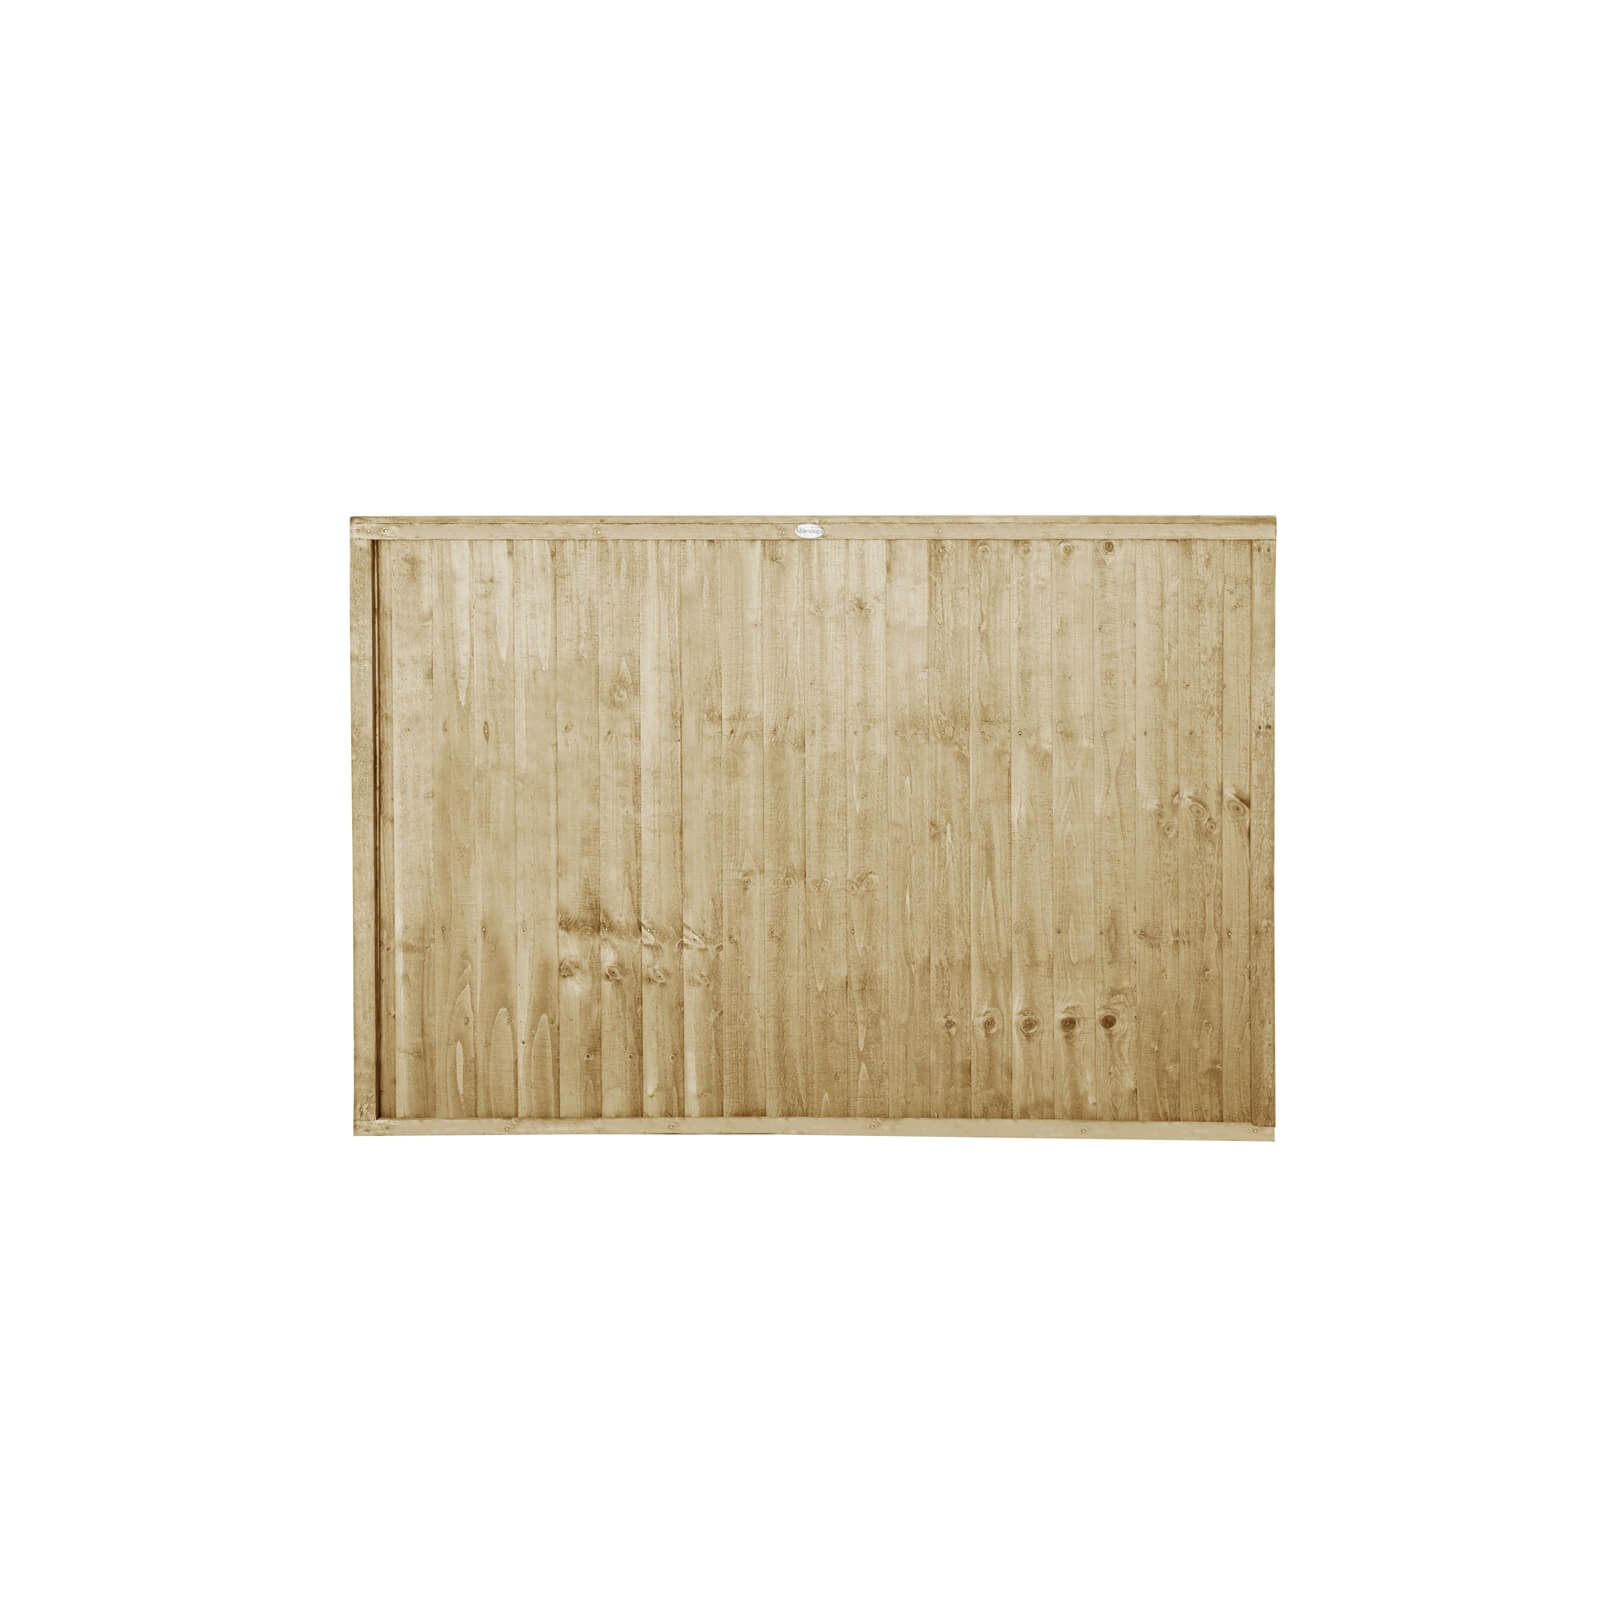 6ft x 4ft (1.83m x 1.22m) Pressure Treated Closeboard Fence Panel - Pack of 20